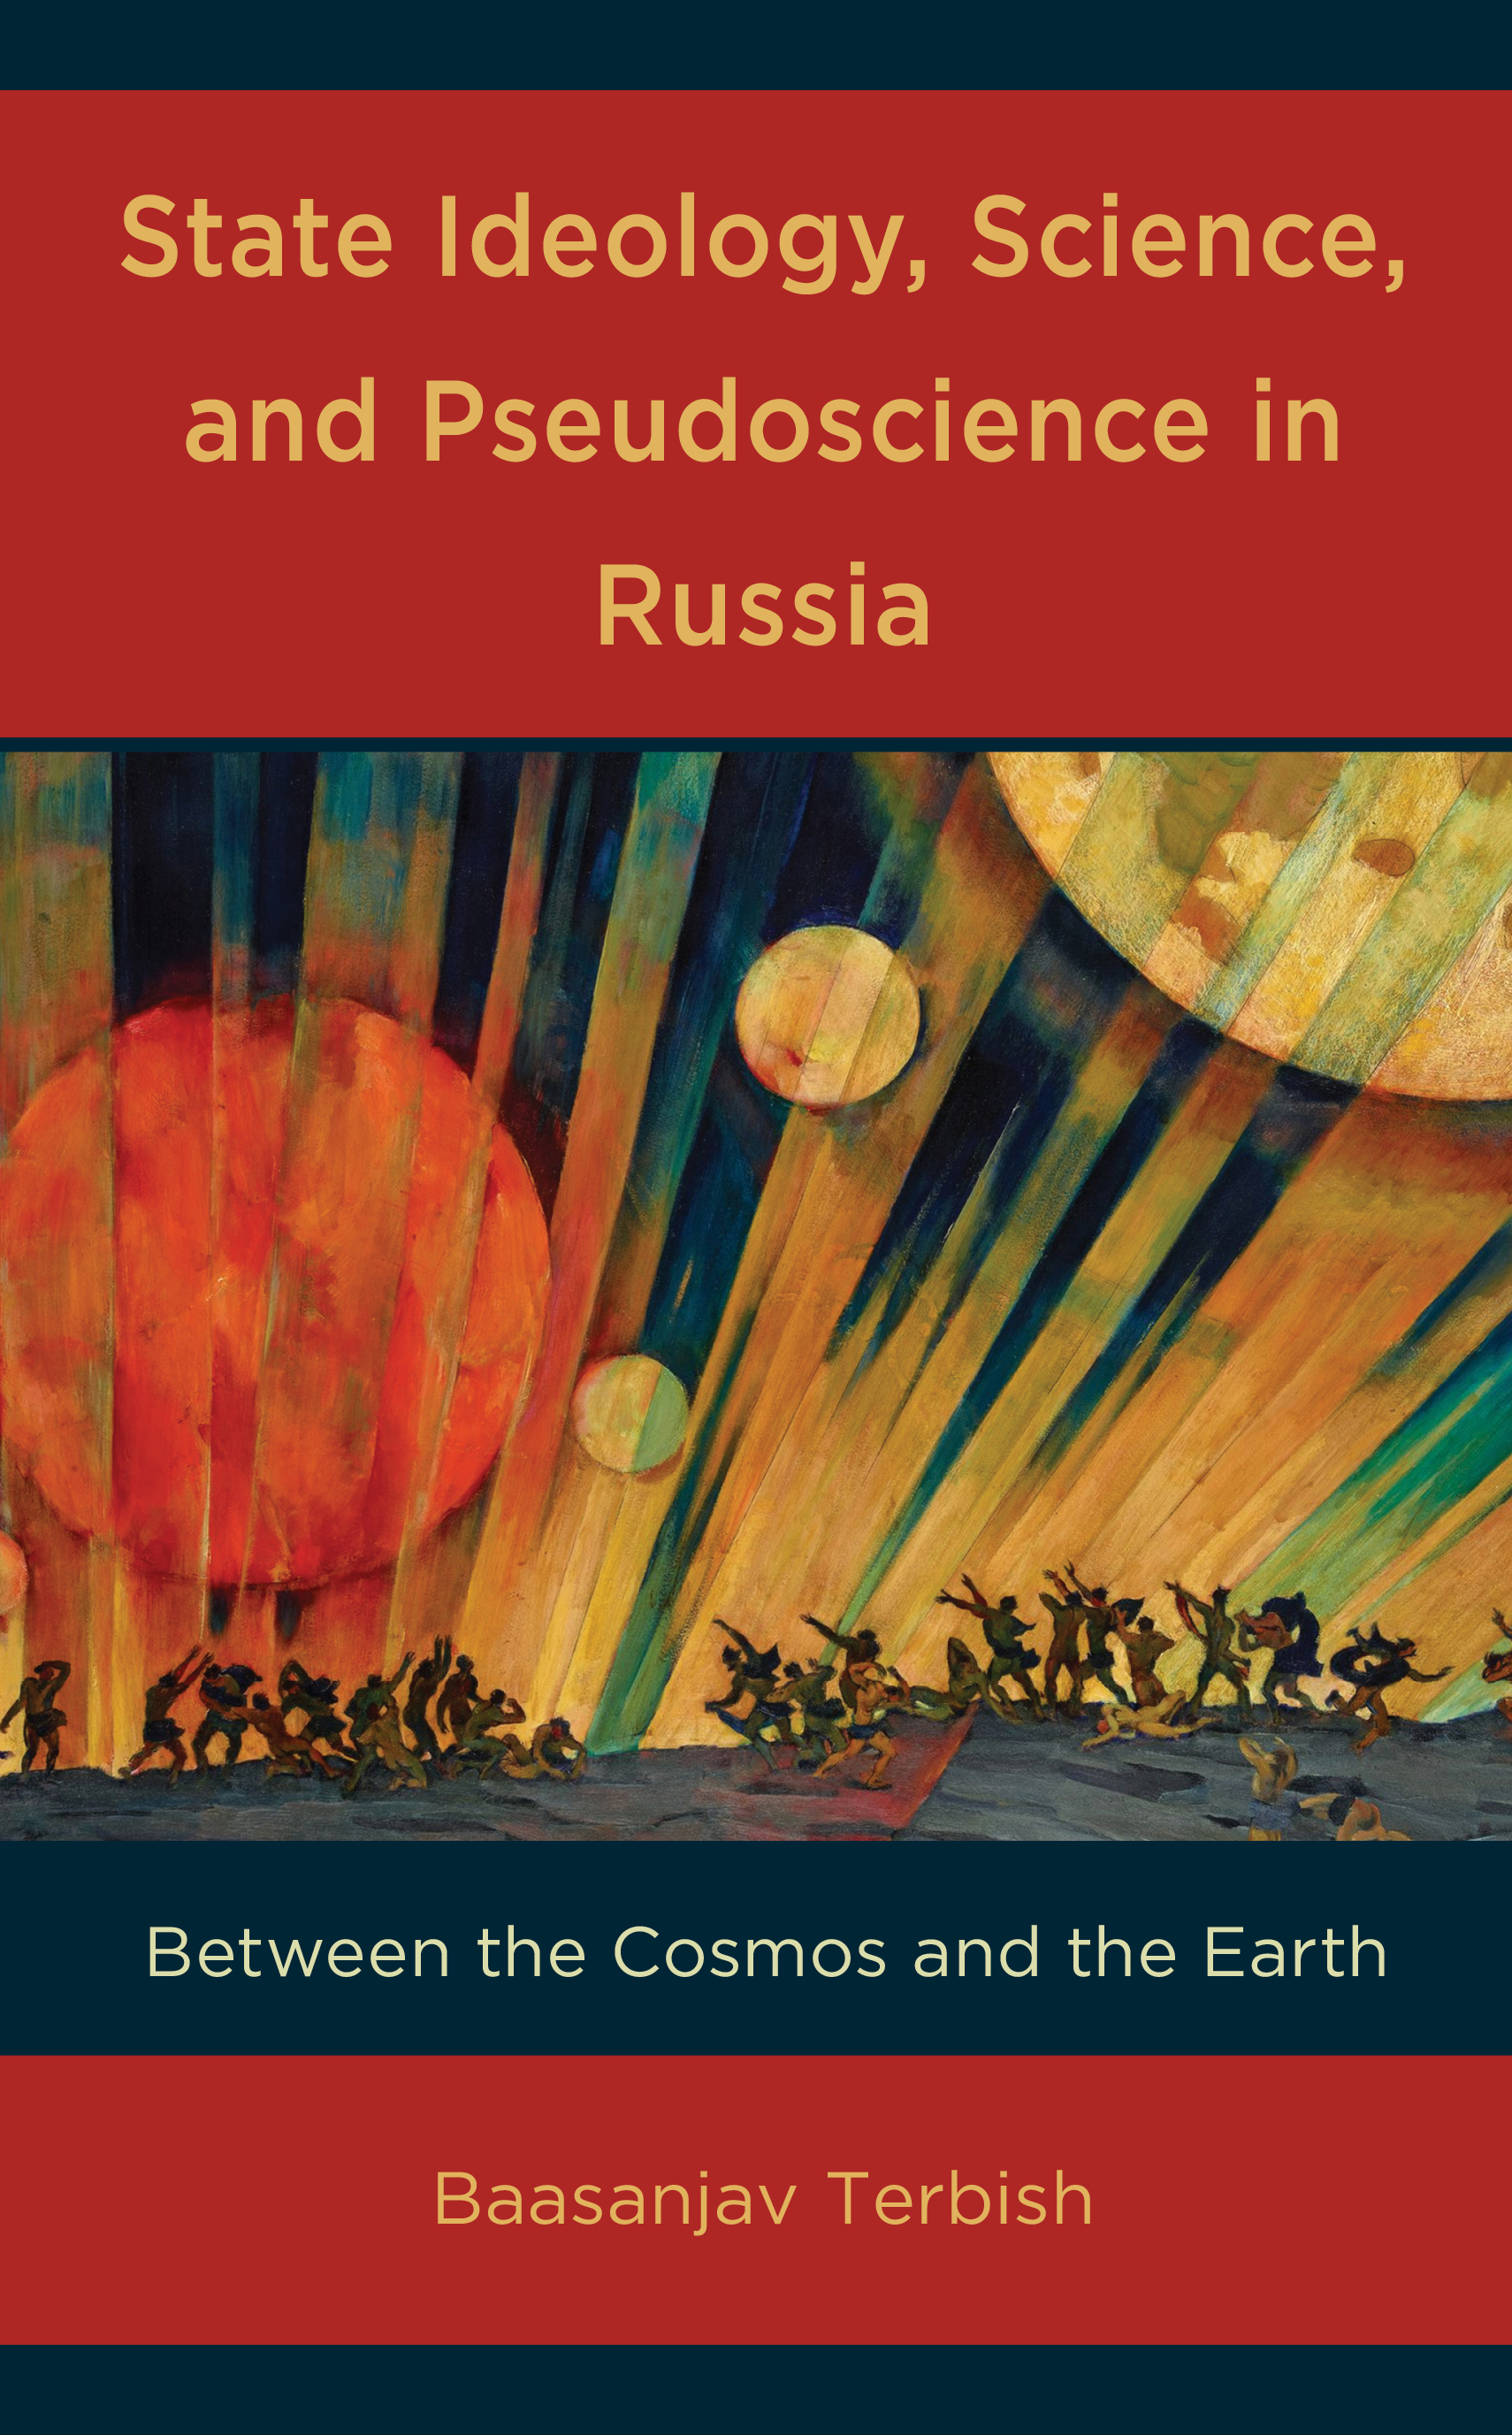 State Ideology, Science, and Pseudoscience in Russia: Between the Cosmos and the Earth